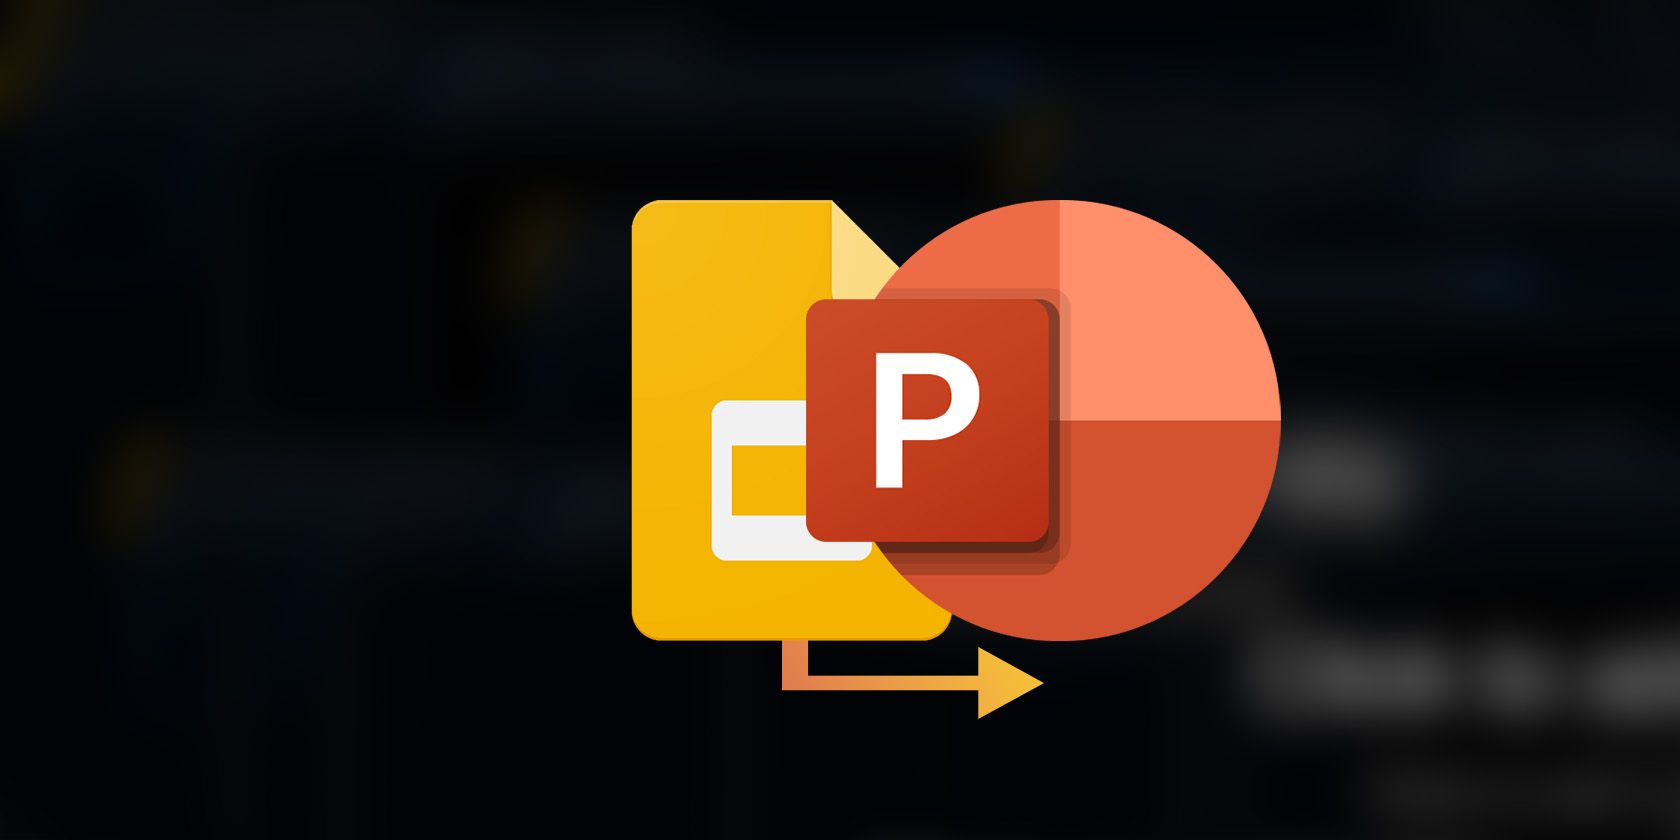 Google Slides and PowerPoint logos with an arrow between them